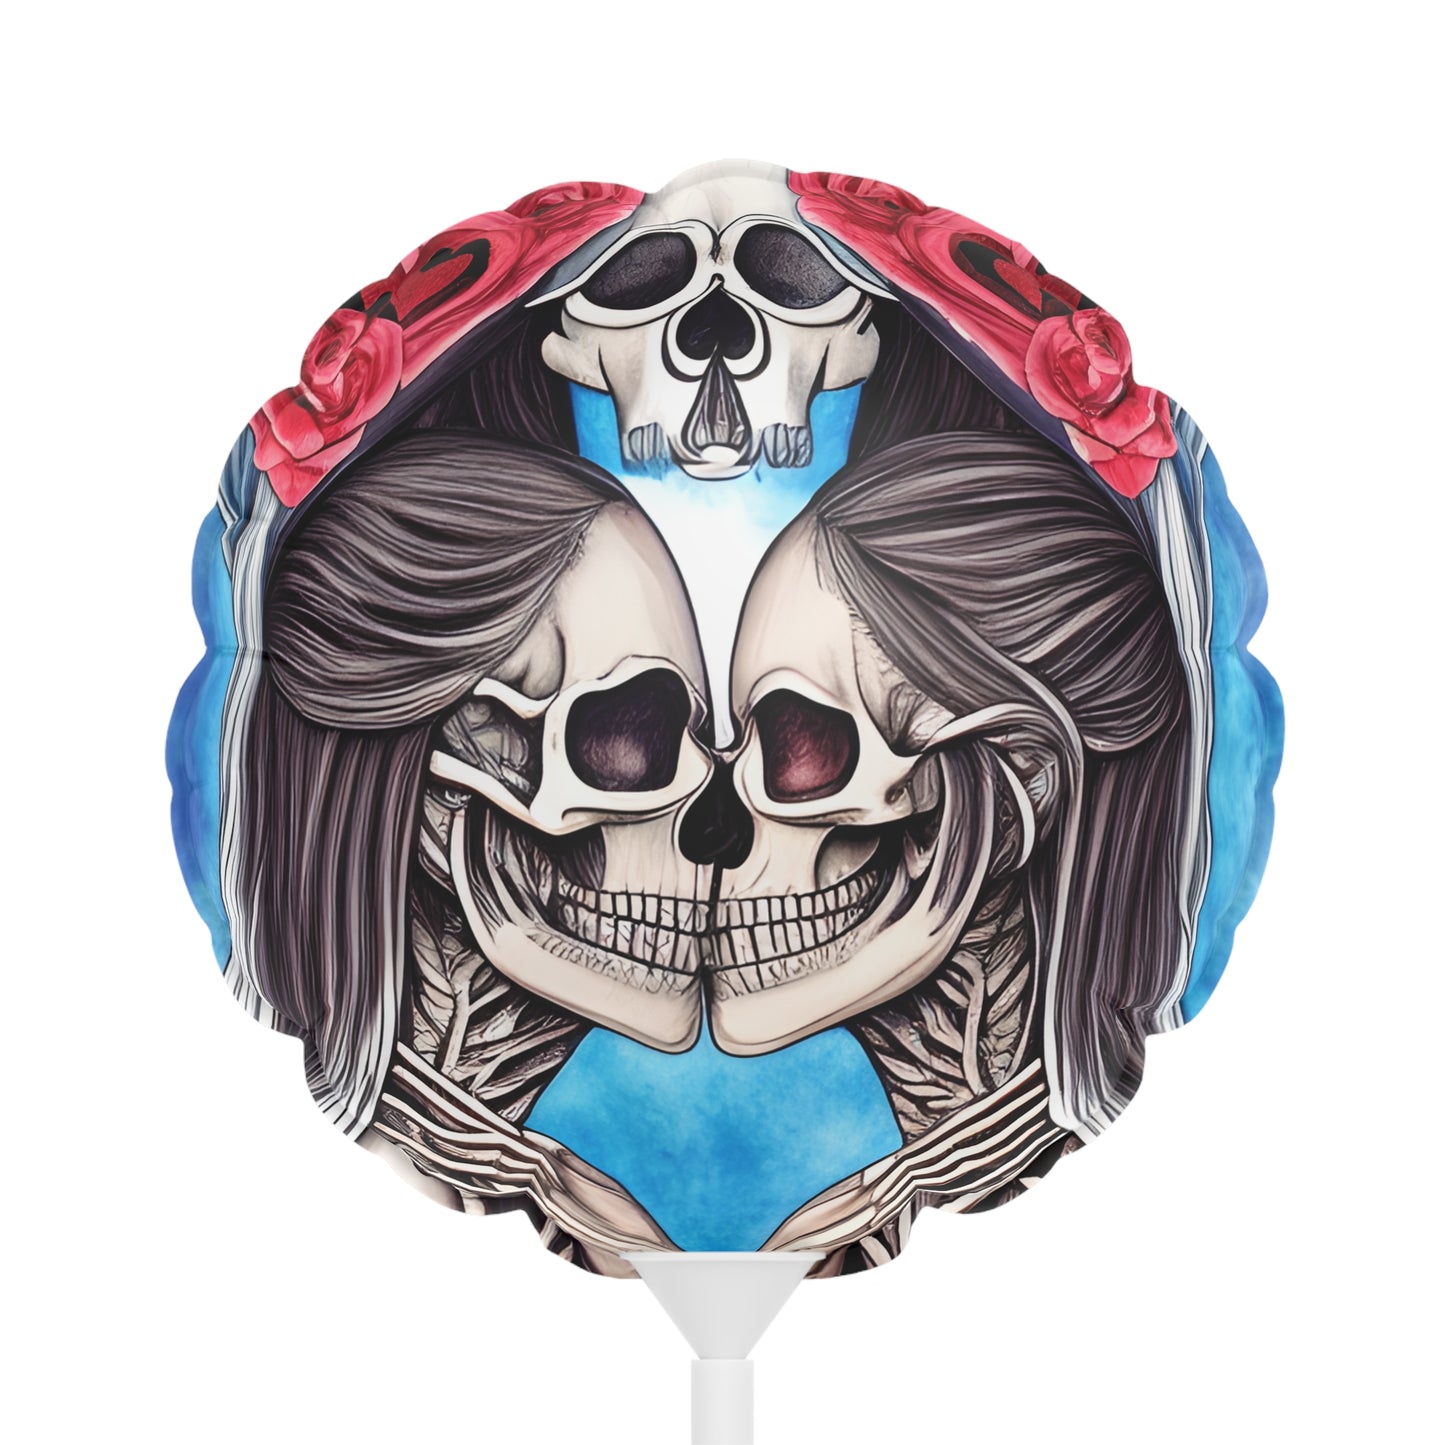 Love Shows No Time Boundaries Skulls,  Loewenkind Creations Balloons (Round and Heart-shaped), 6"